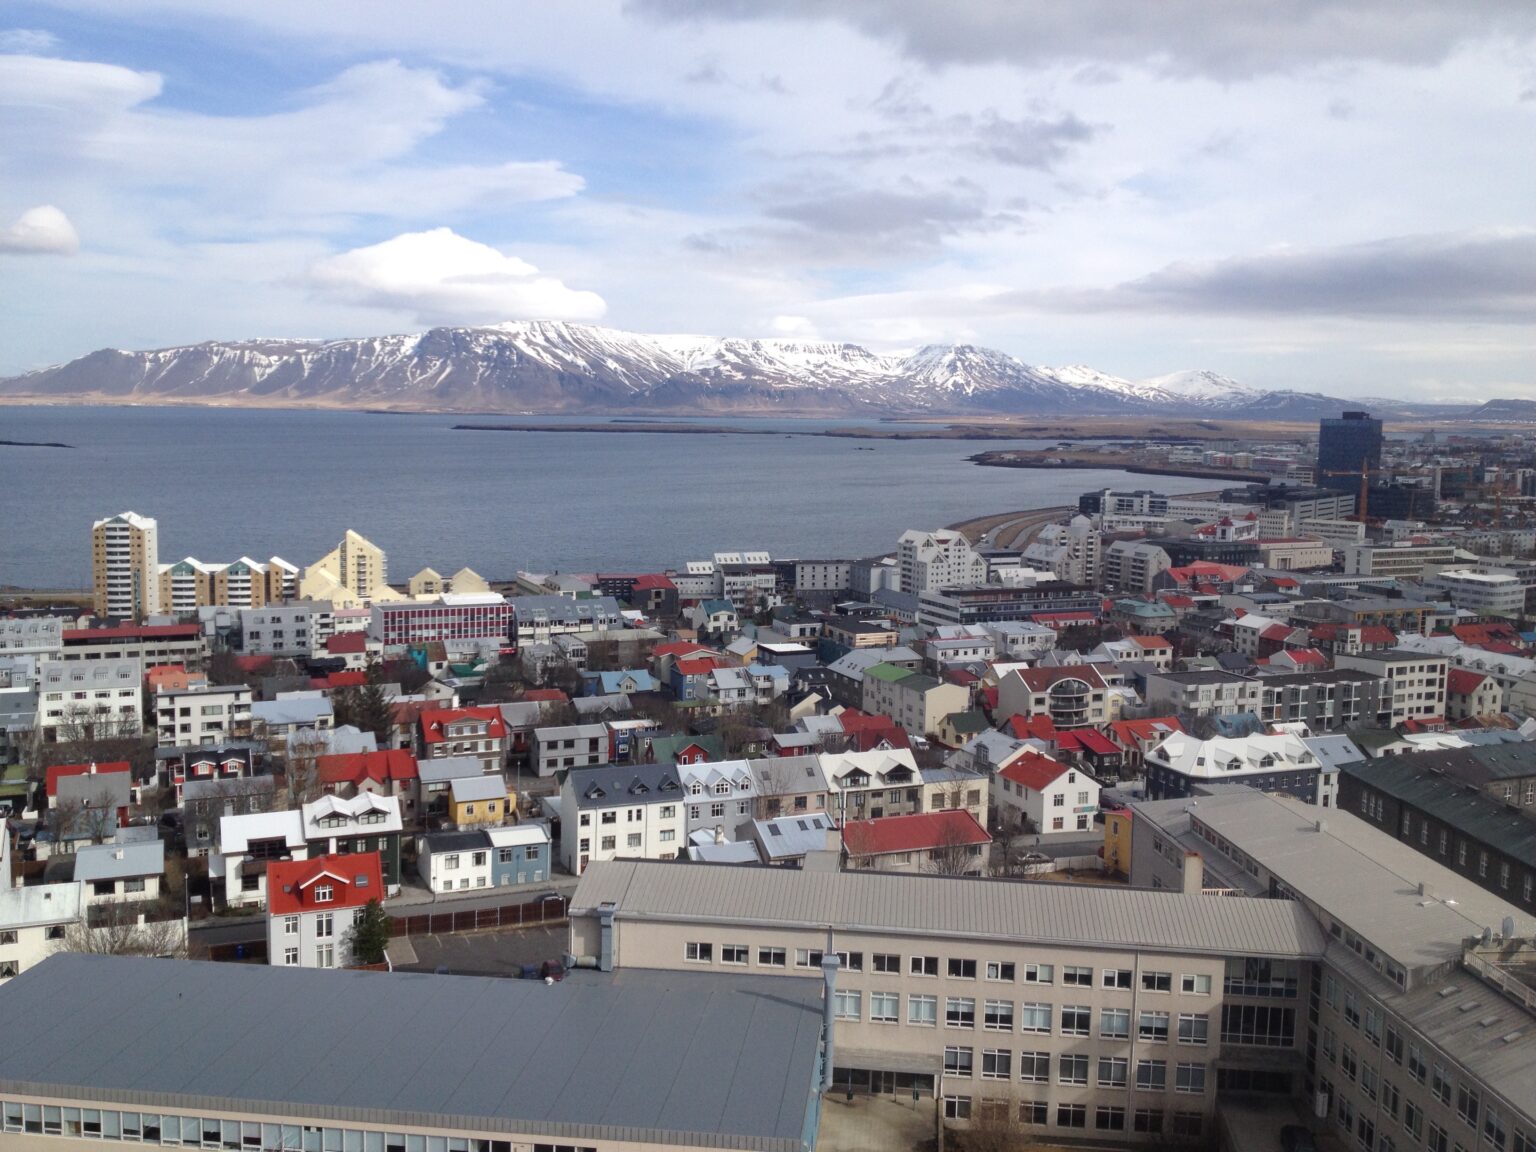 The view from Reykjavik